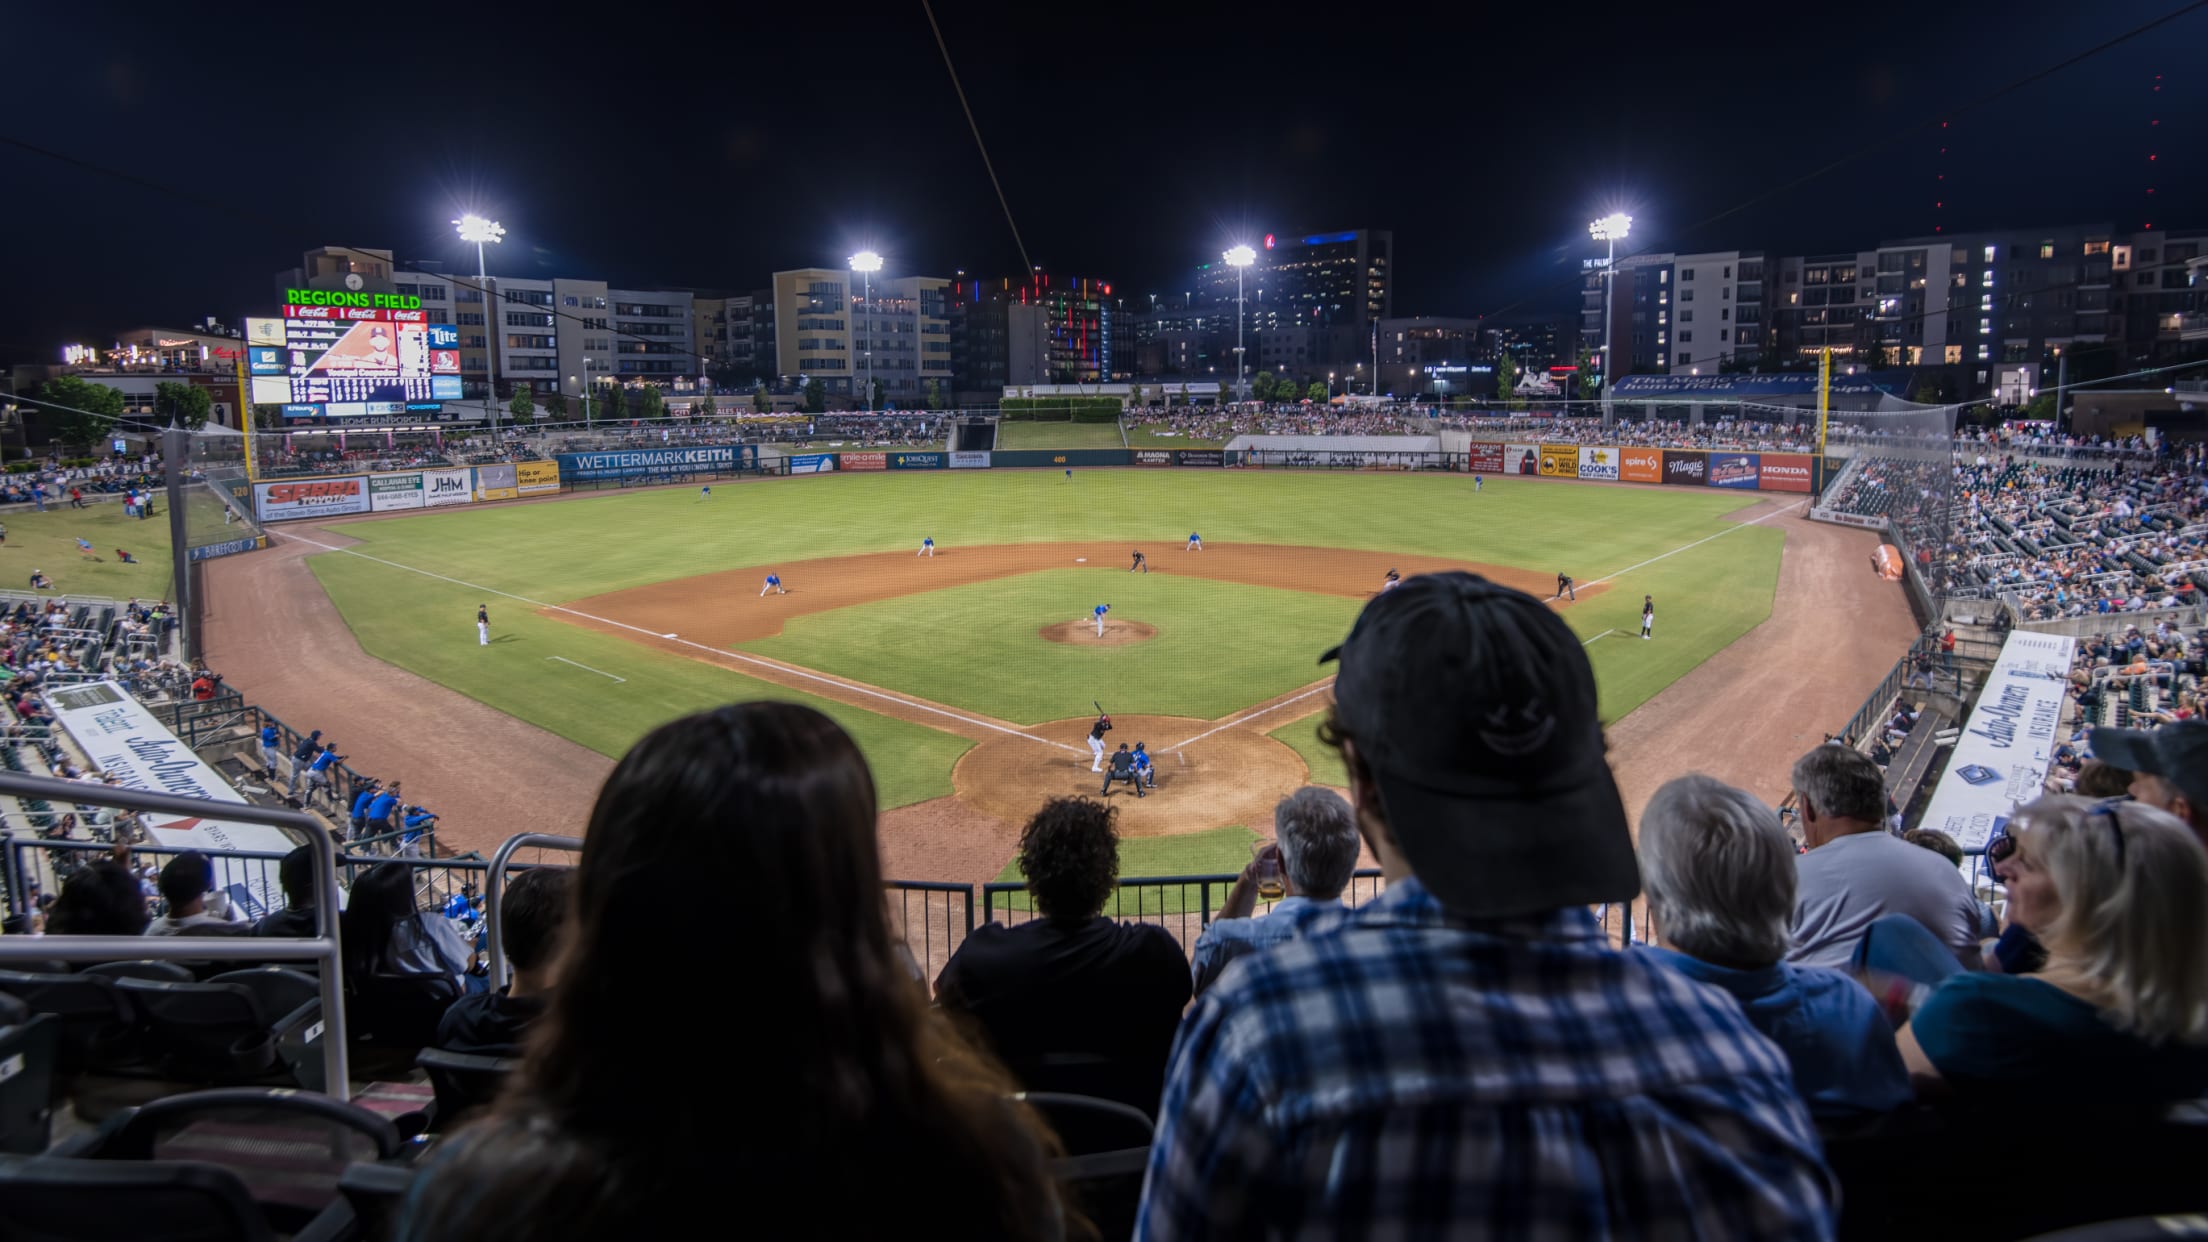 What are your colors? Show your team - Birmingham Barons